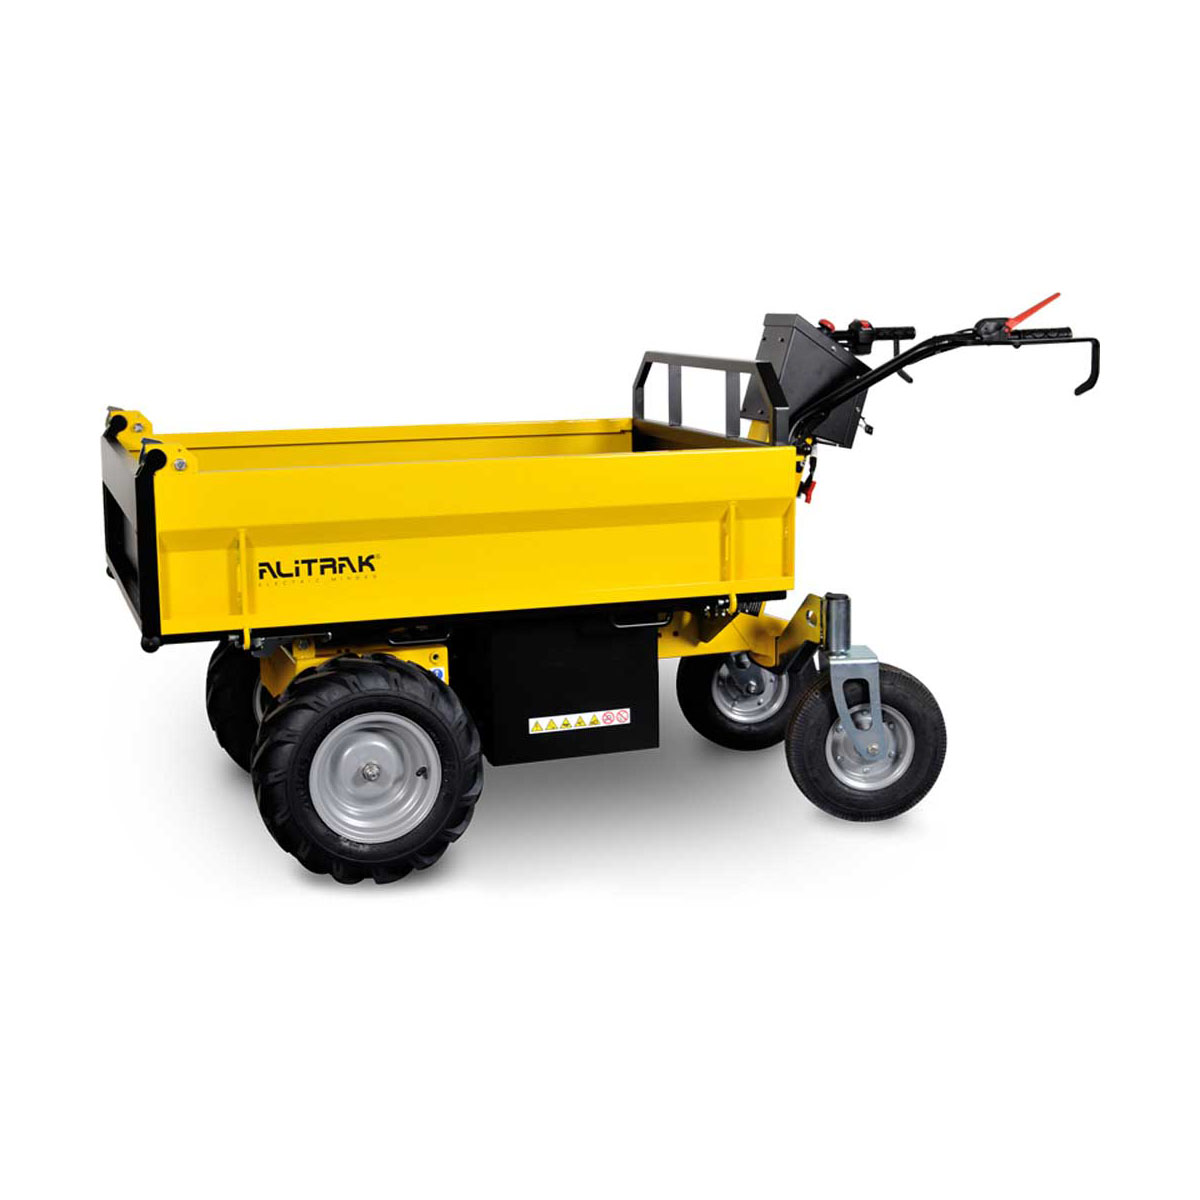 Buy Electric Transporter - Flatbed Mini in Electric Transporter from Alitrak available at Astrolift NZ